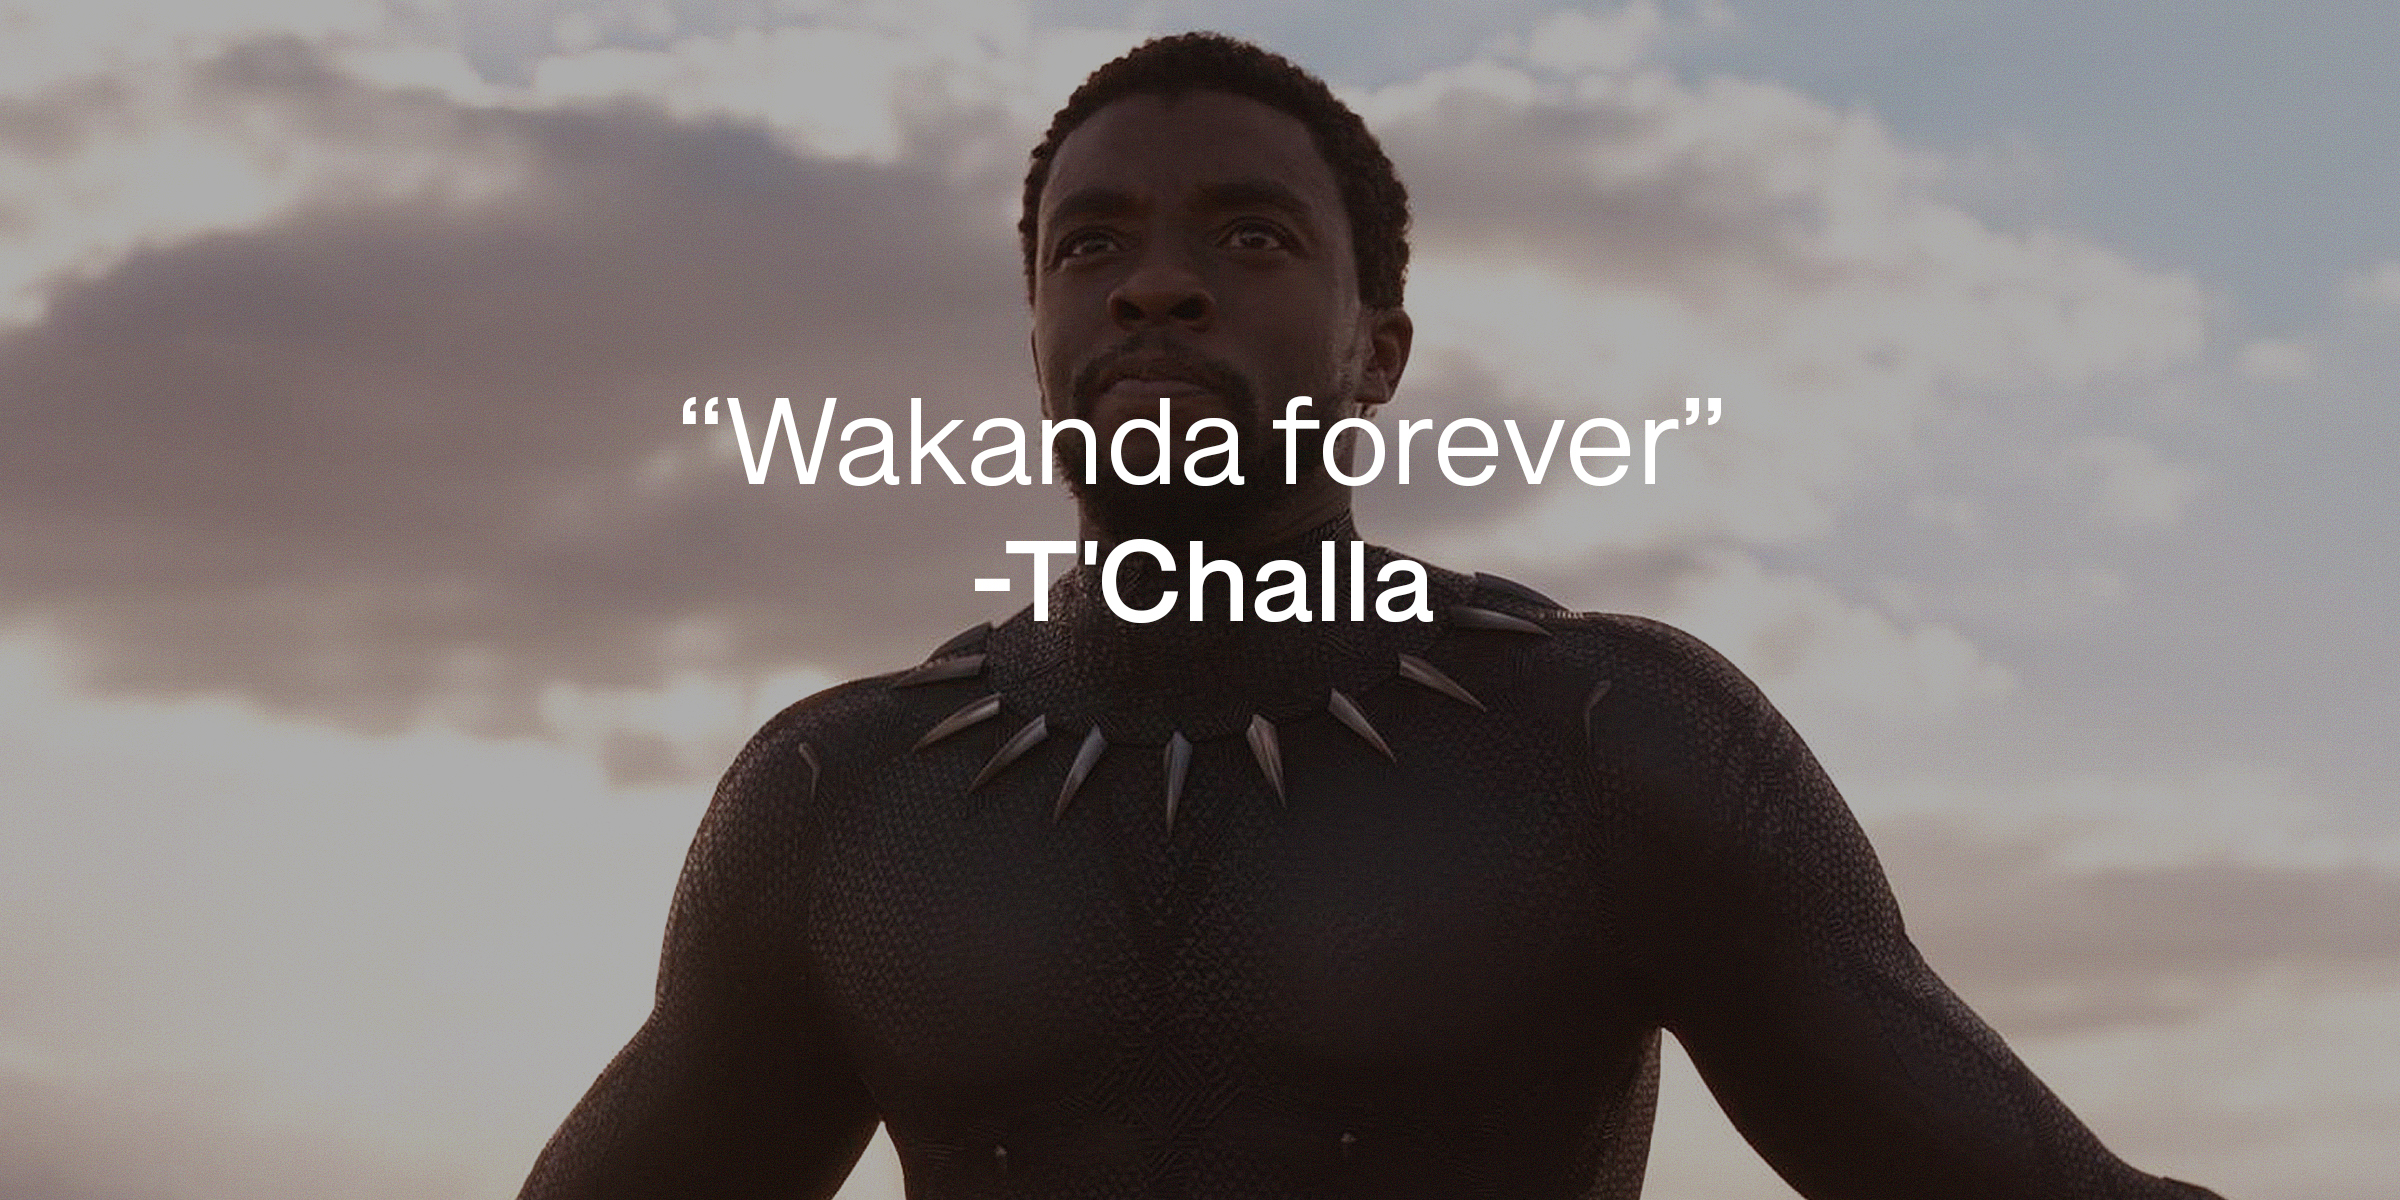 A photo of T'Challa with T'Challa's quote: "Wakanda forever" | Source: facebook.com/BlackPantherMovie